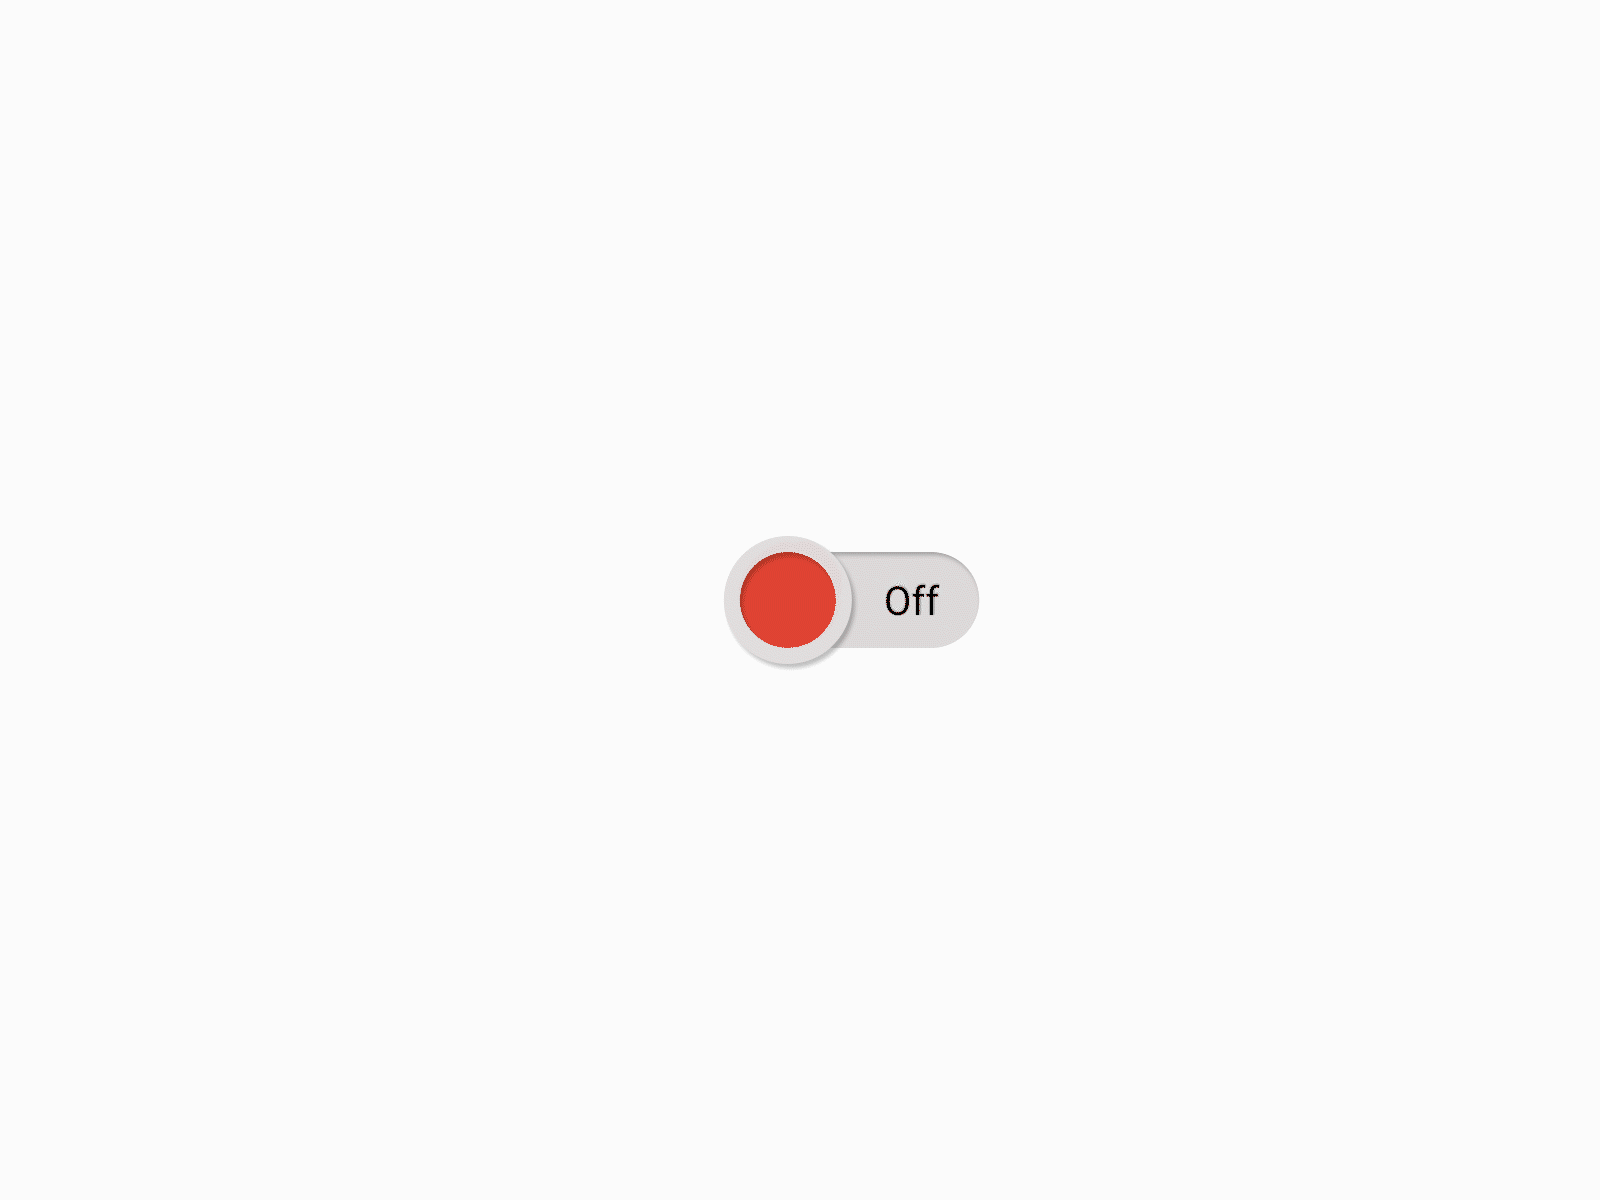 DailyUI Challenge 015 - On/Off switch daily 100 challenge dailyui dailyui 015 dailyuichallenge indicator on off on off switch slider switch toggle ui ui design